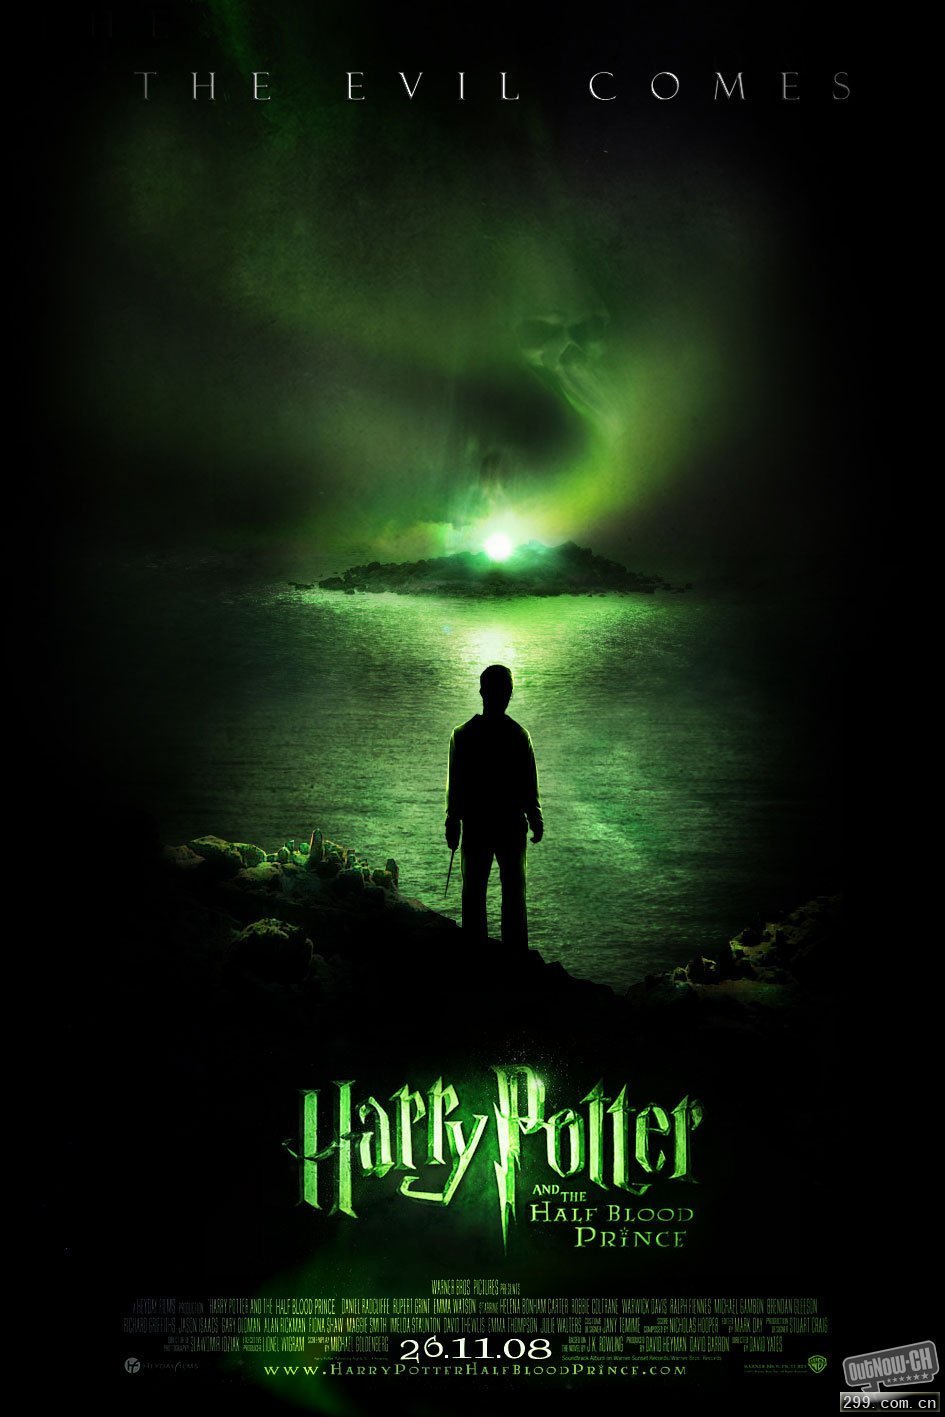 Harry Potter Mobile Wallpapers